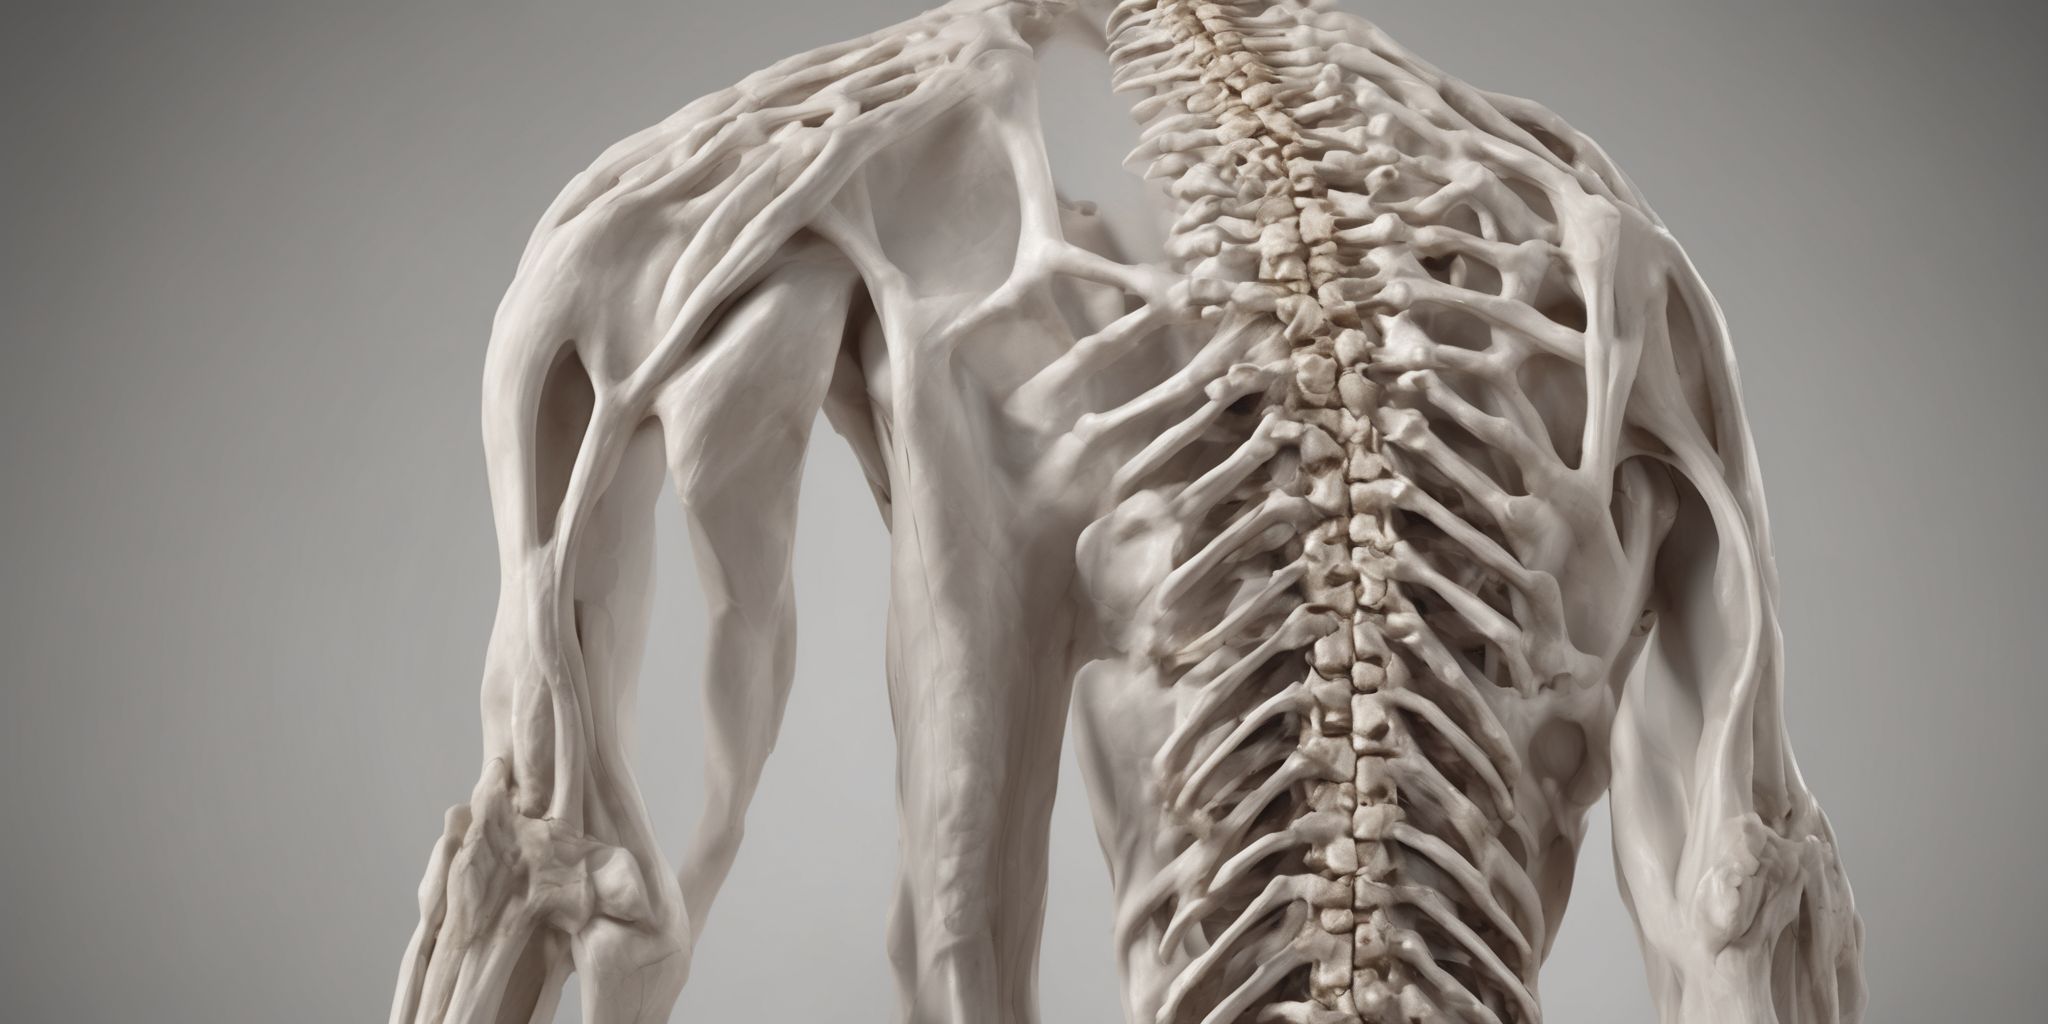 Backbone  in realistic, photographic style